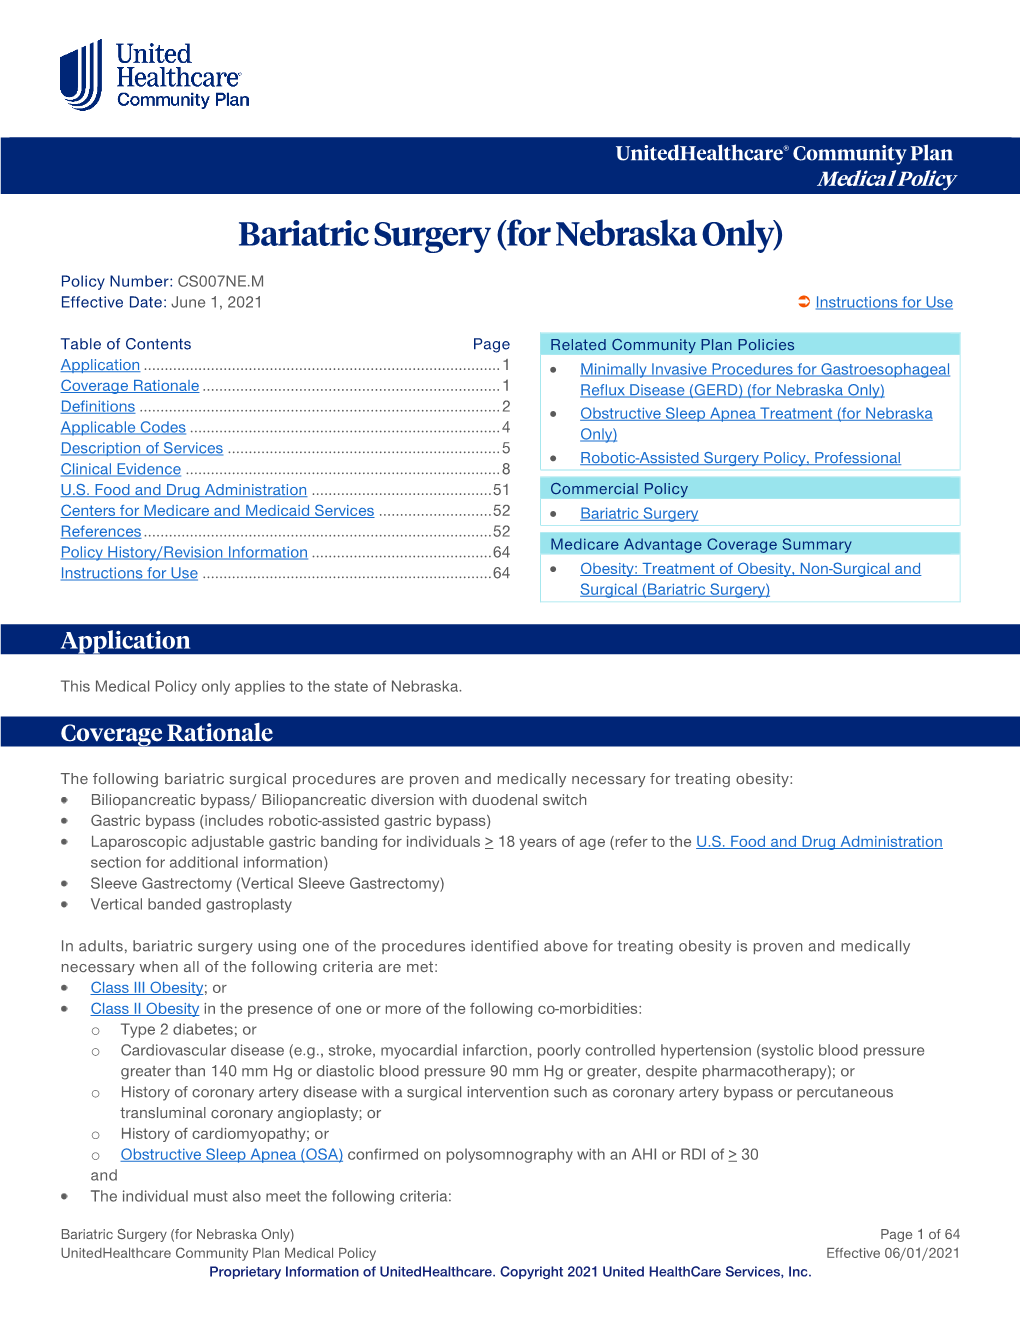 Bariatric Surgery (For Nebraska Only) – Community Plan Medical Policy